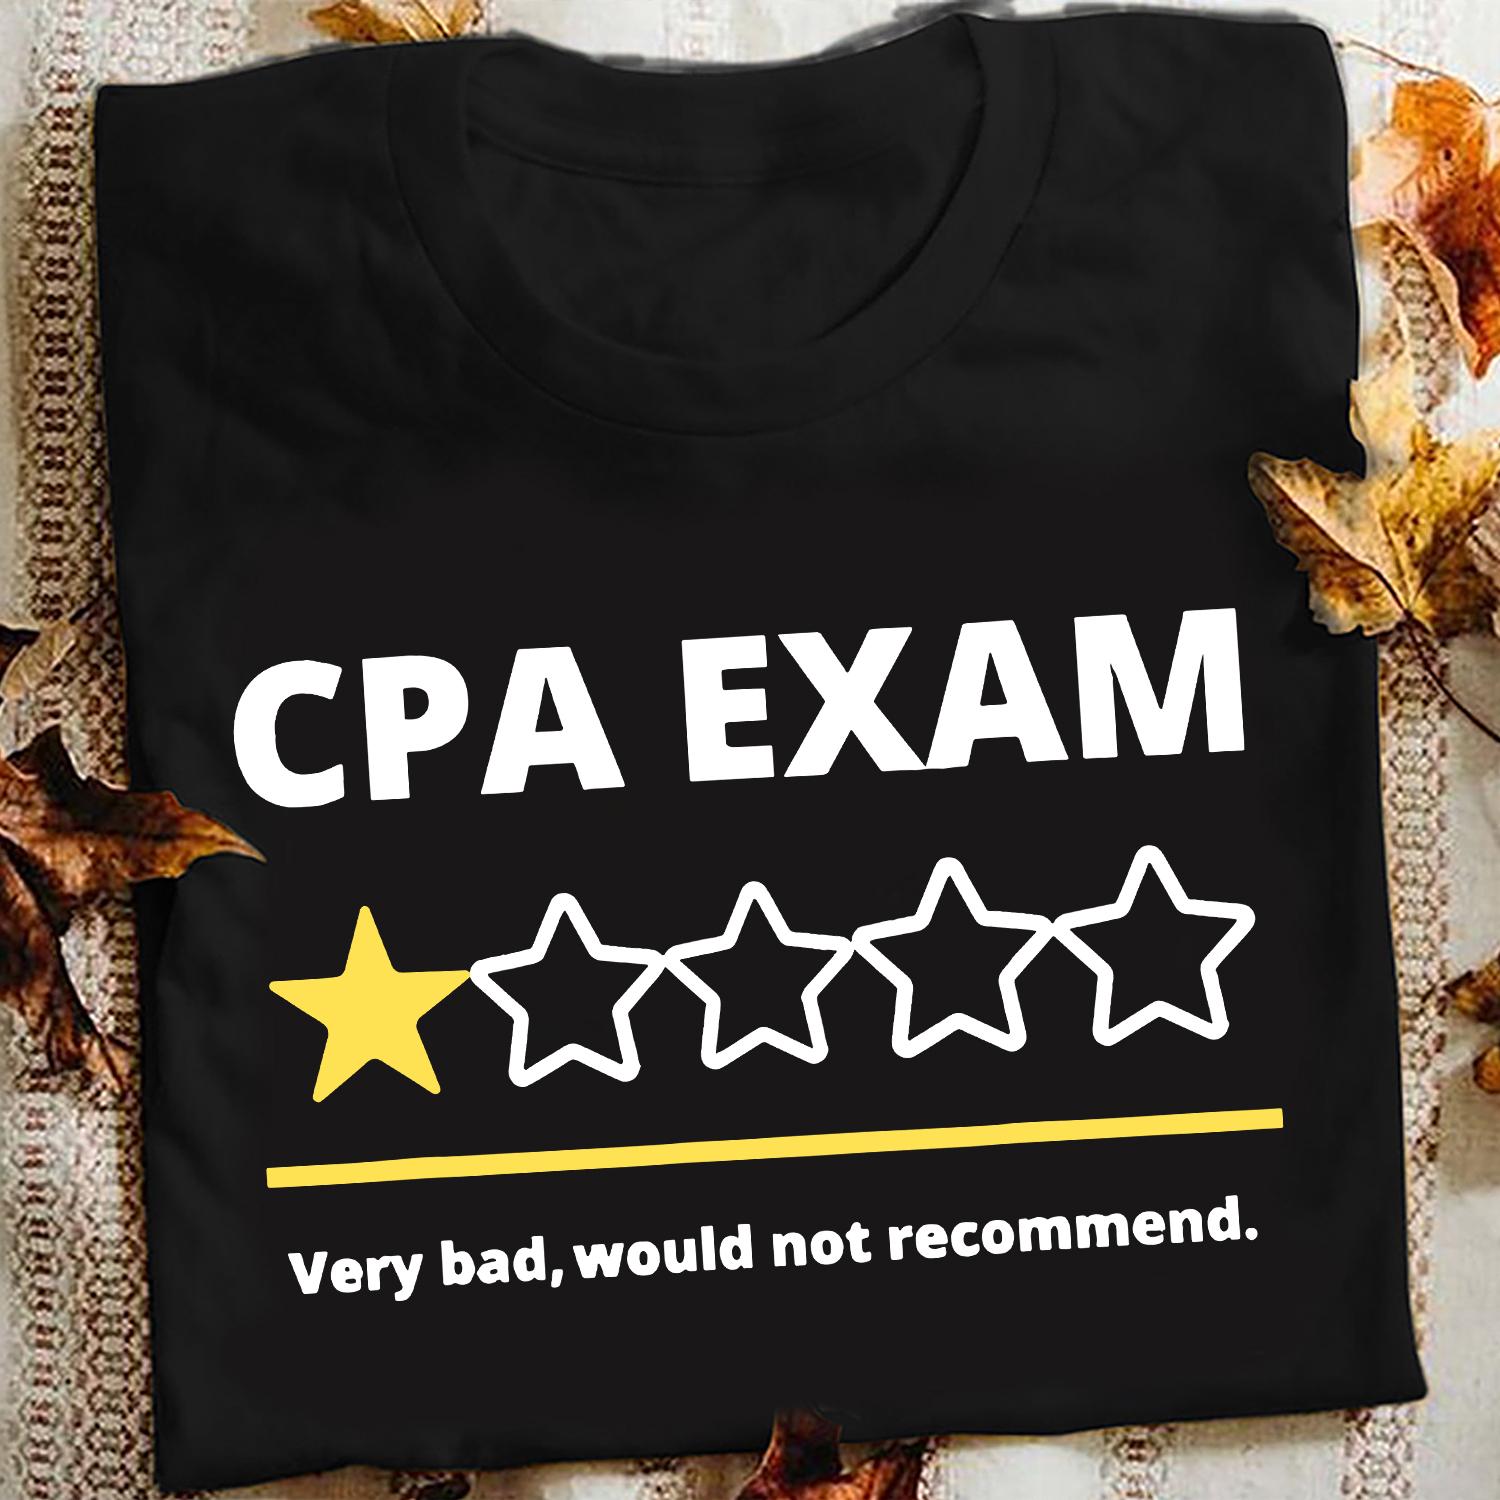 CPA Exam - Very bad, would not recommend, 1 star CPA Exam